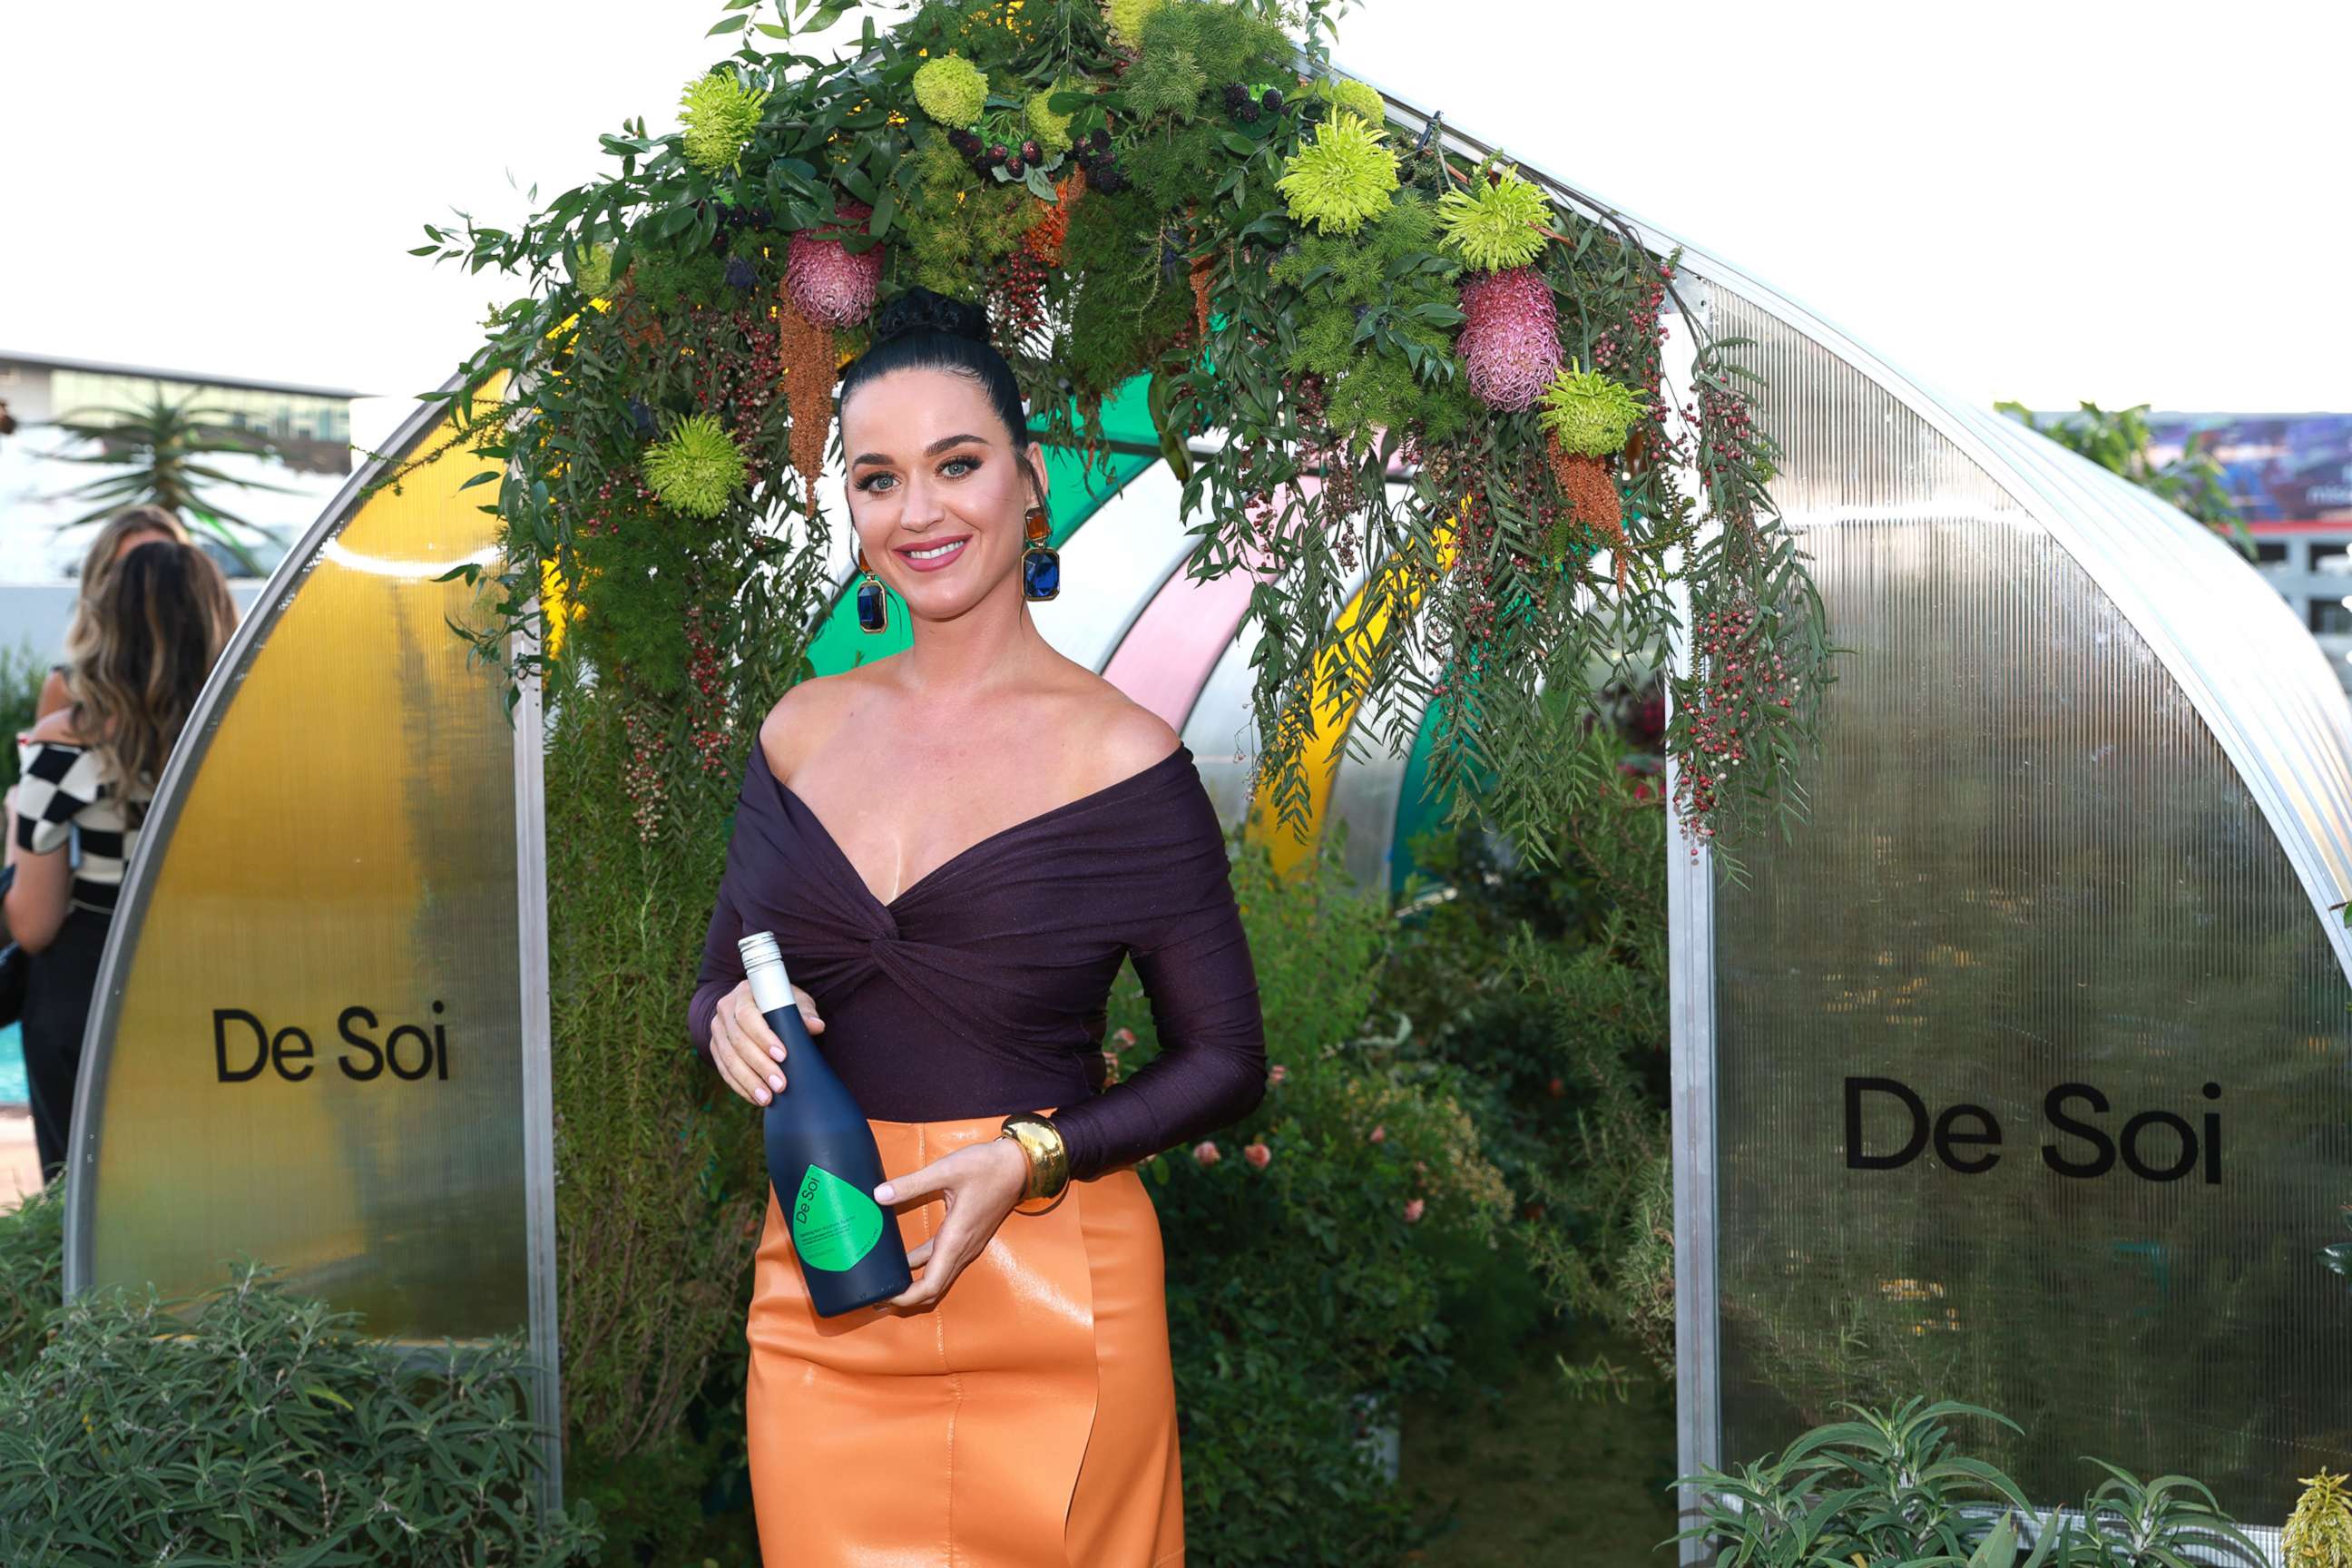 PHOTO: Katy Perry attends a pop up event in Los Angeles, July 28, 2022.